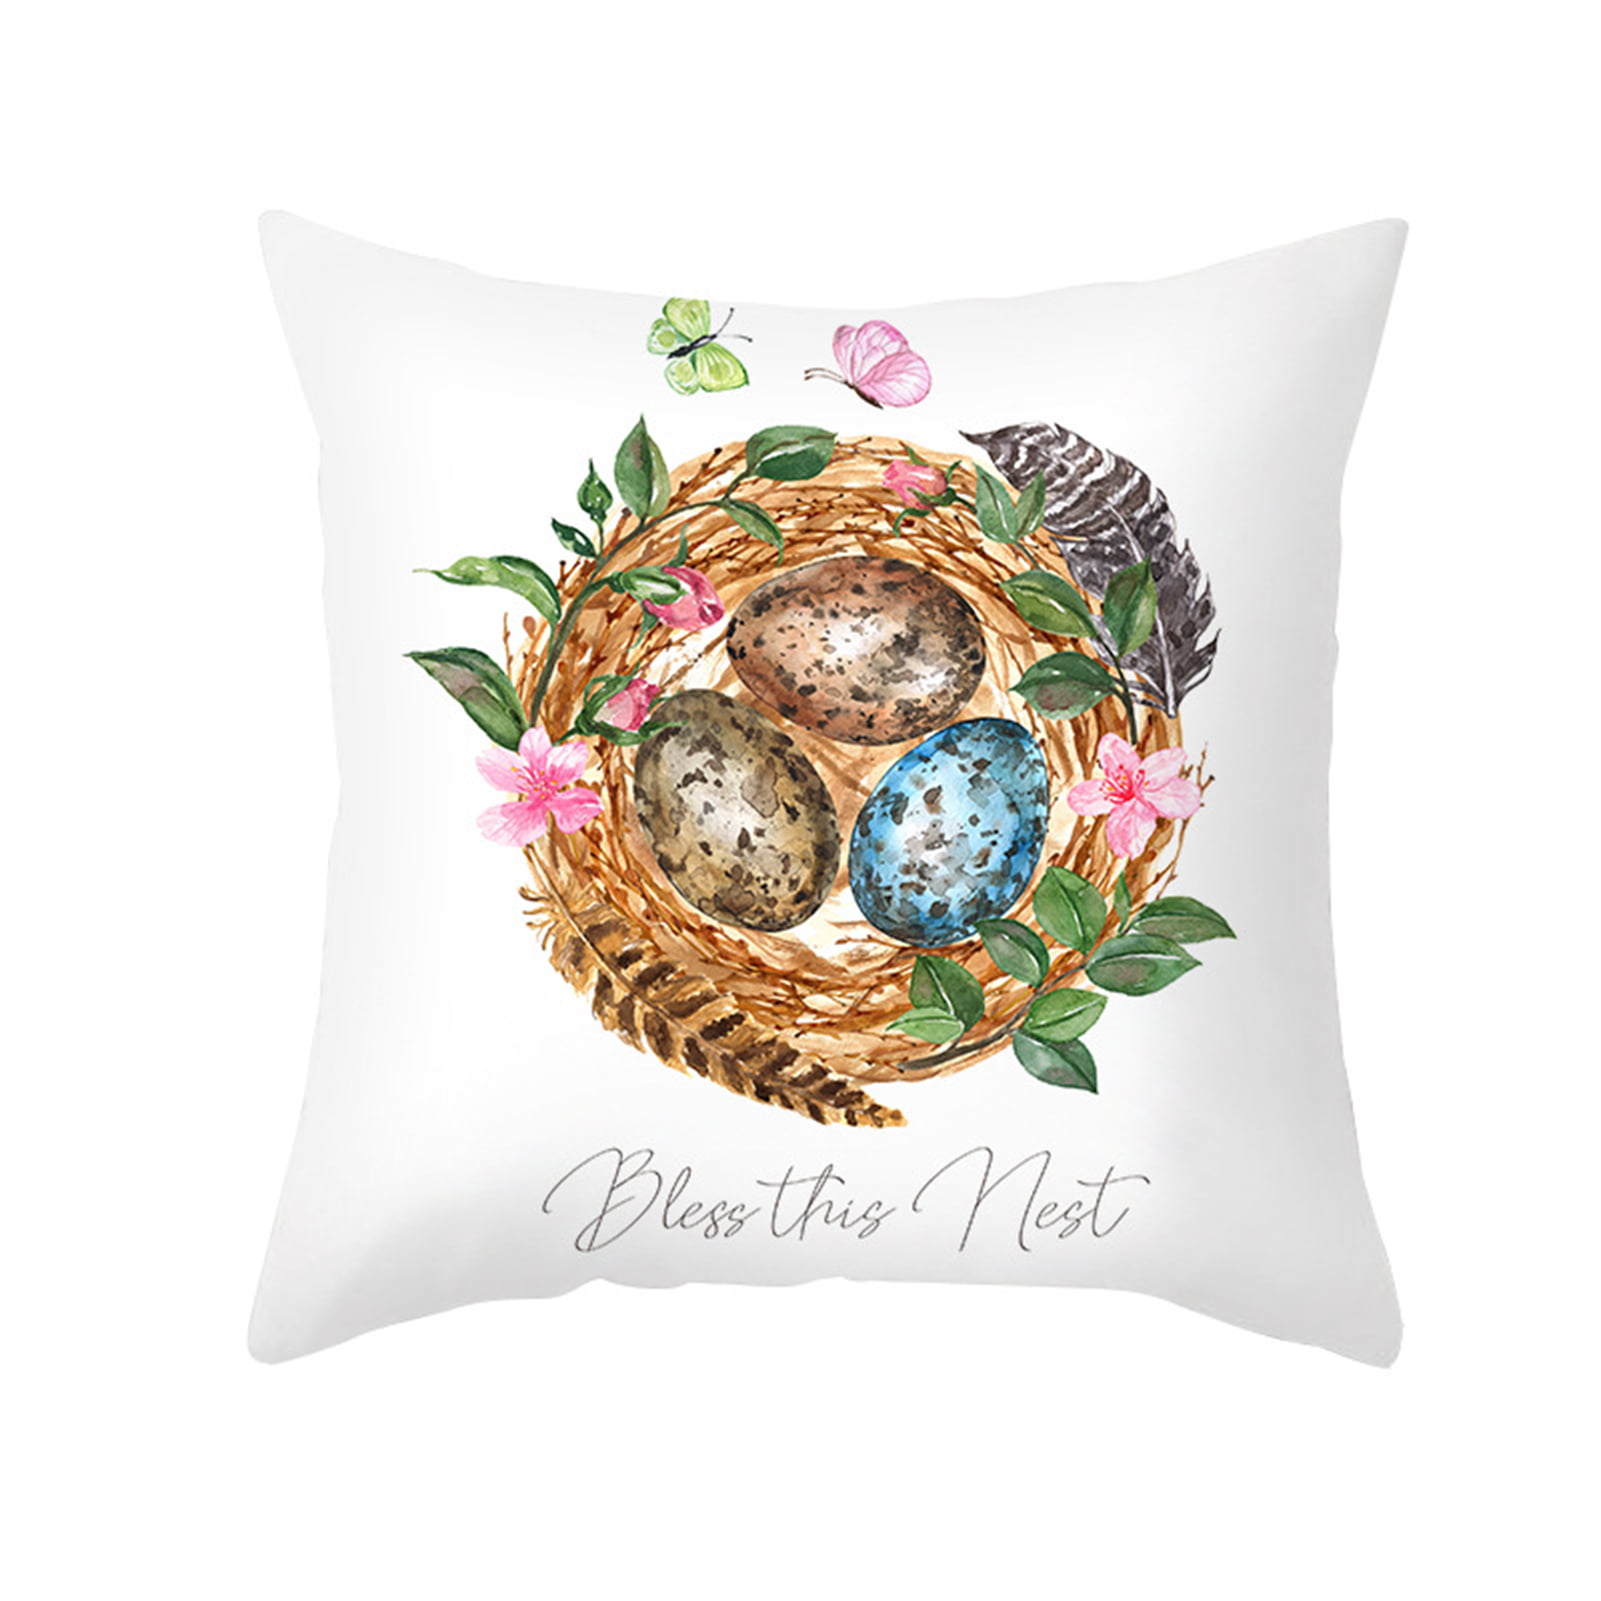 Throw Pillow Case Happy Easter Eggs Cotton Linen Square Cushion Cover Pillowcases for Home Decorative Living Room Bedroom Sofa Couch Colorful Egg on Grid Background 26x26inch